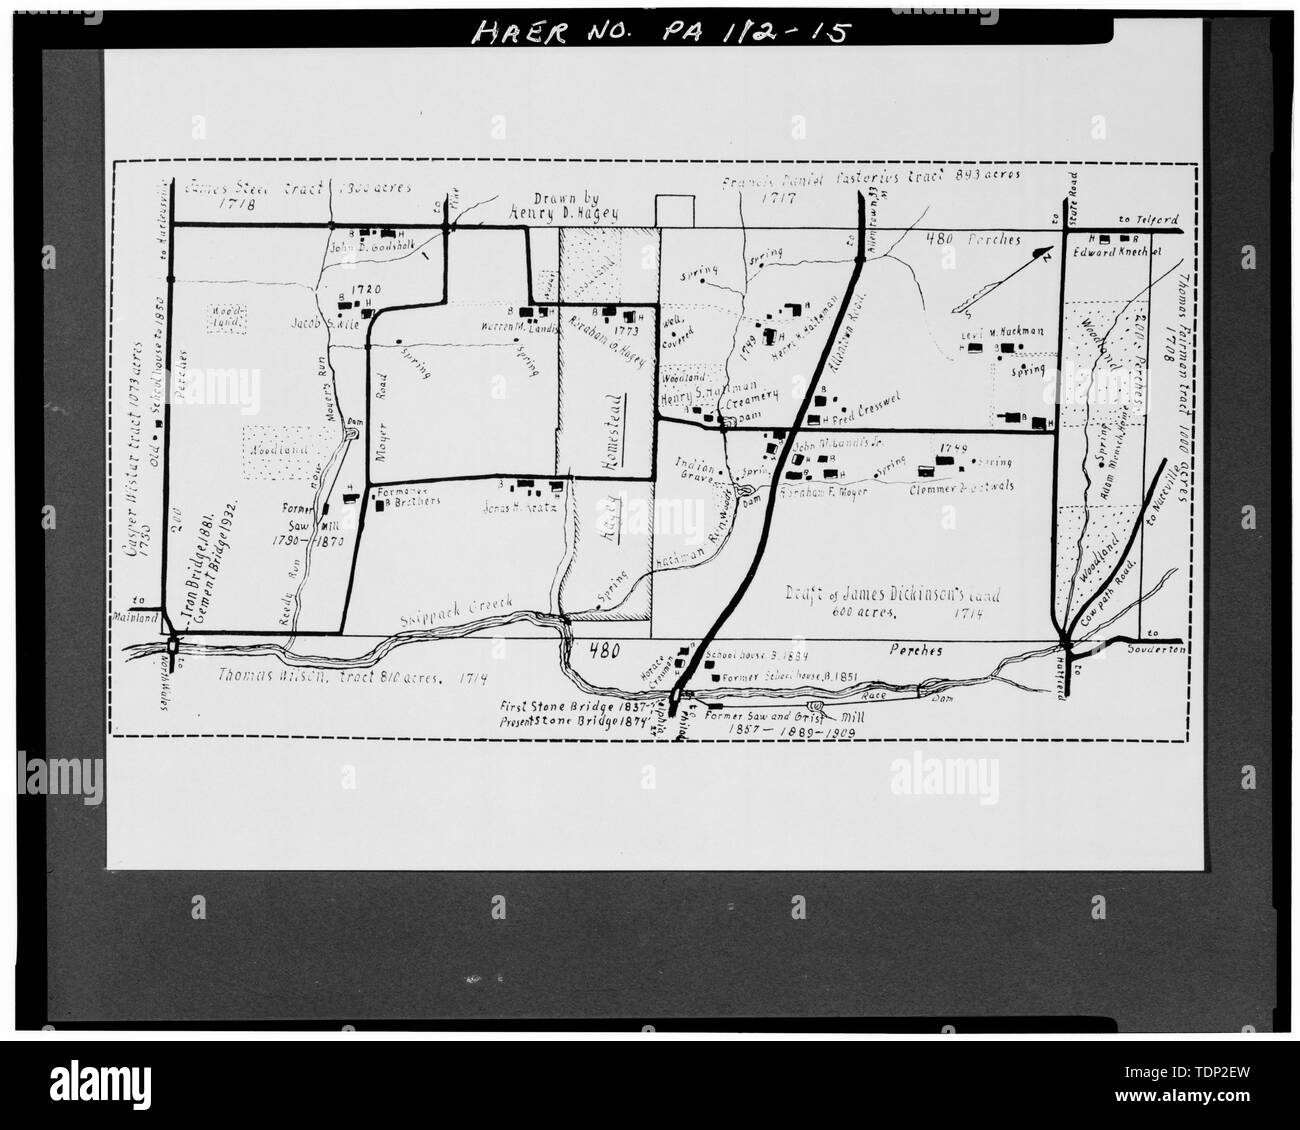 Photocopy Of Map Drawn By Henry Hagey Circa 1900 From Willing Inhabitants Original In Possession Of Author Joyce Munro Franconia Township Map Bridge Location In Bottom Center Allentown Road Bridge Spanning Skippack Creek On Allentown Road Franconia Montgomery County Pa Cresson James Just William Pennsylvania Department Of Transportation Moore William Pennemen Robert Houpt Ezekiel Houpt Isaiah B Hagey Henry Spero Paula A C Contractor Shelley Robert C Photographer TDP2EW 